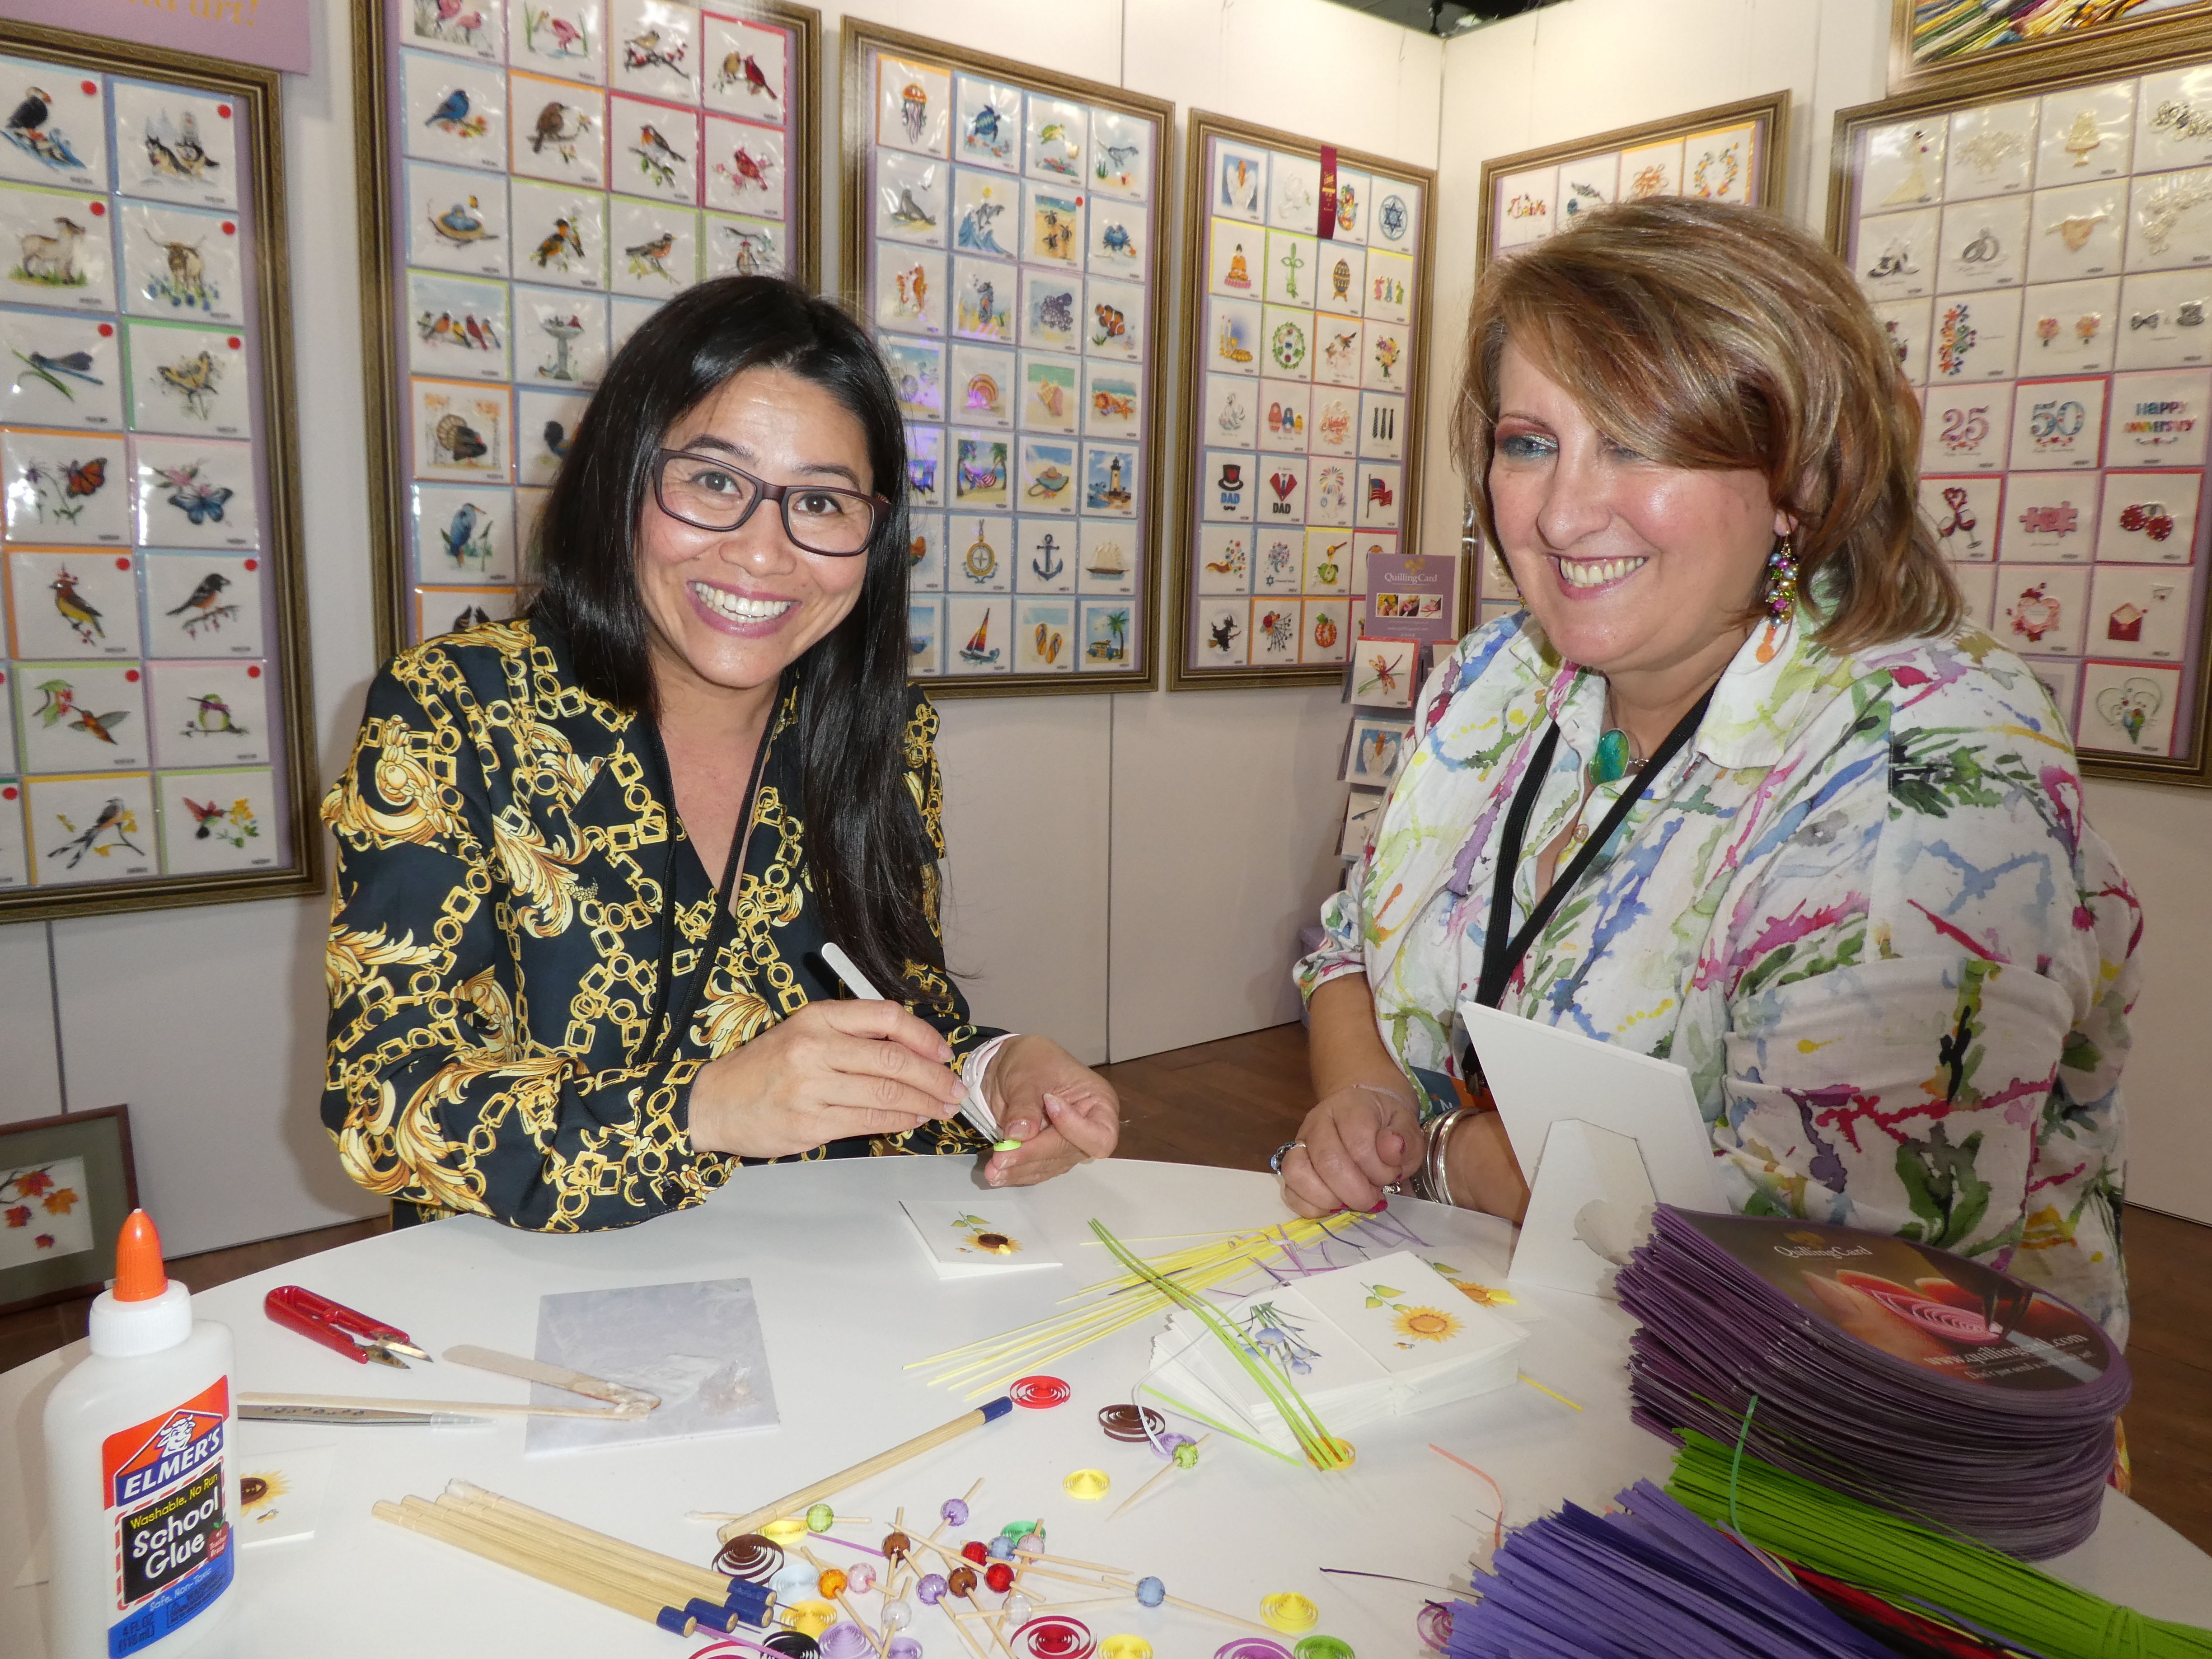 Above: Huong Wolf, founder of Quilling Card demonstrating the art to Rosie Trow, south west agent on its stand at Noted. 